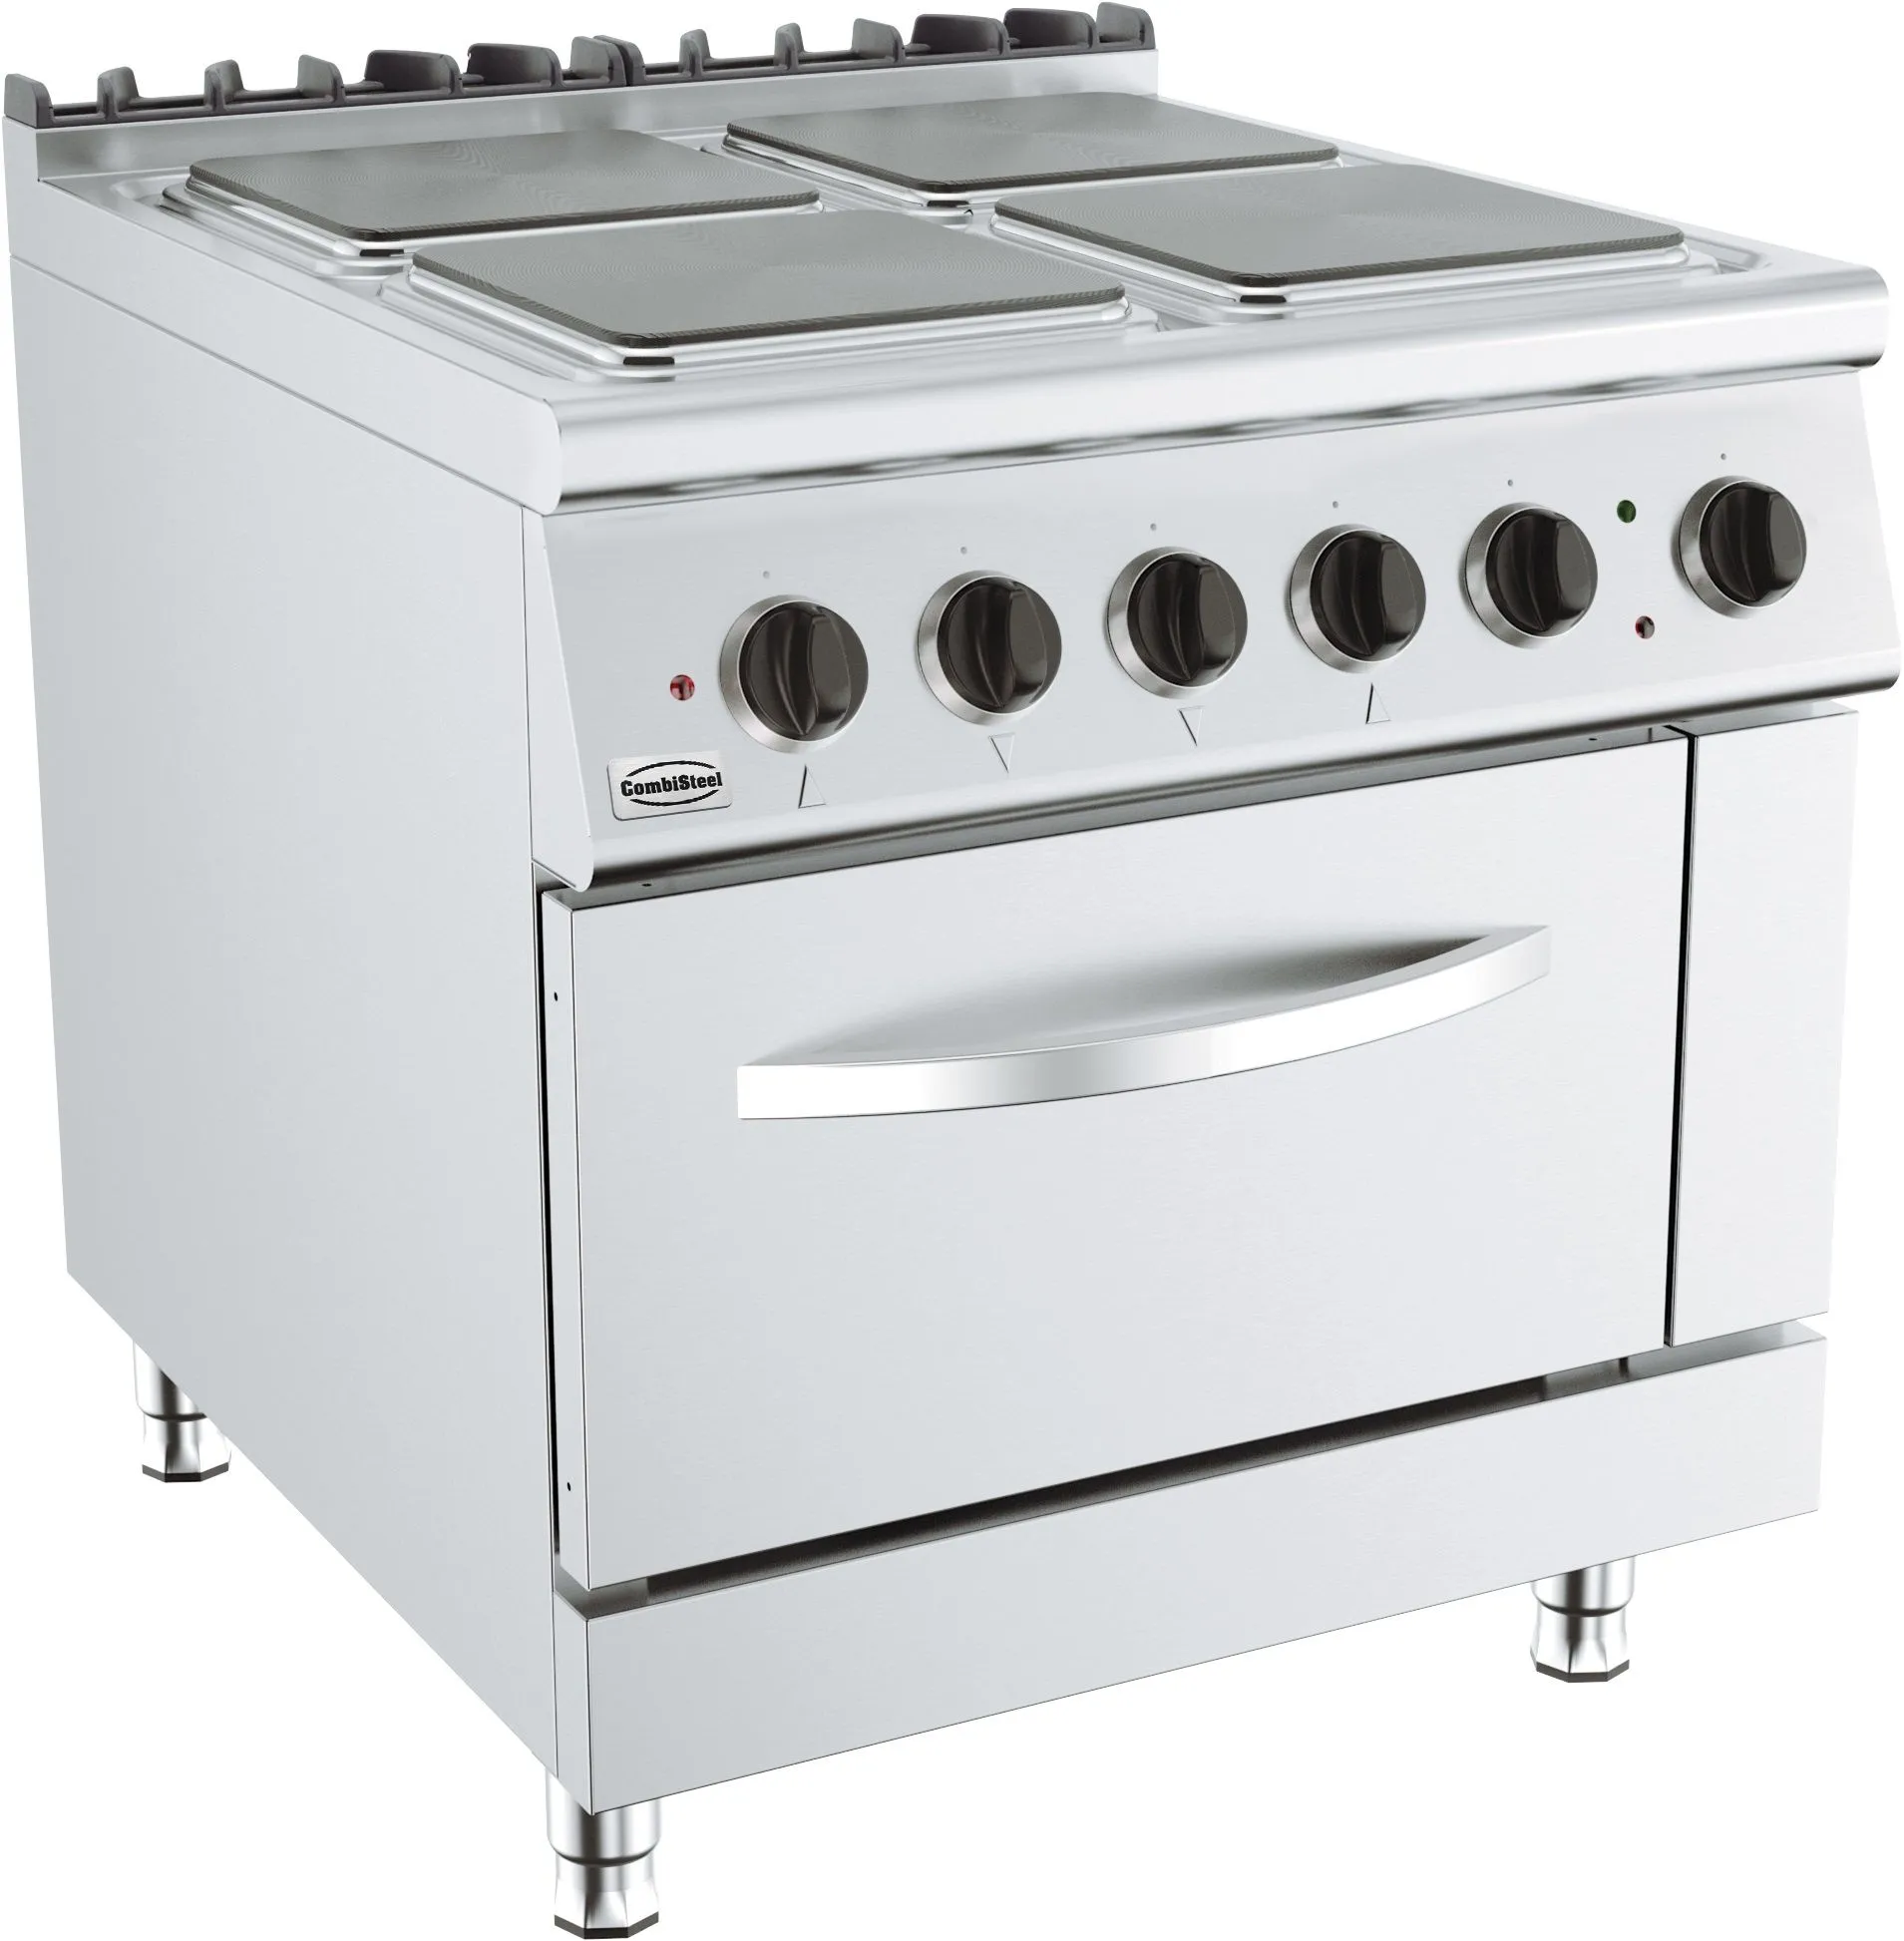 CombiSteel Base 900 Freestanding Gas Stove 4 Burner With 18 kW Electric Oven